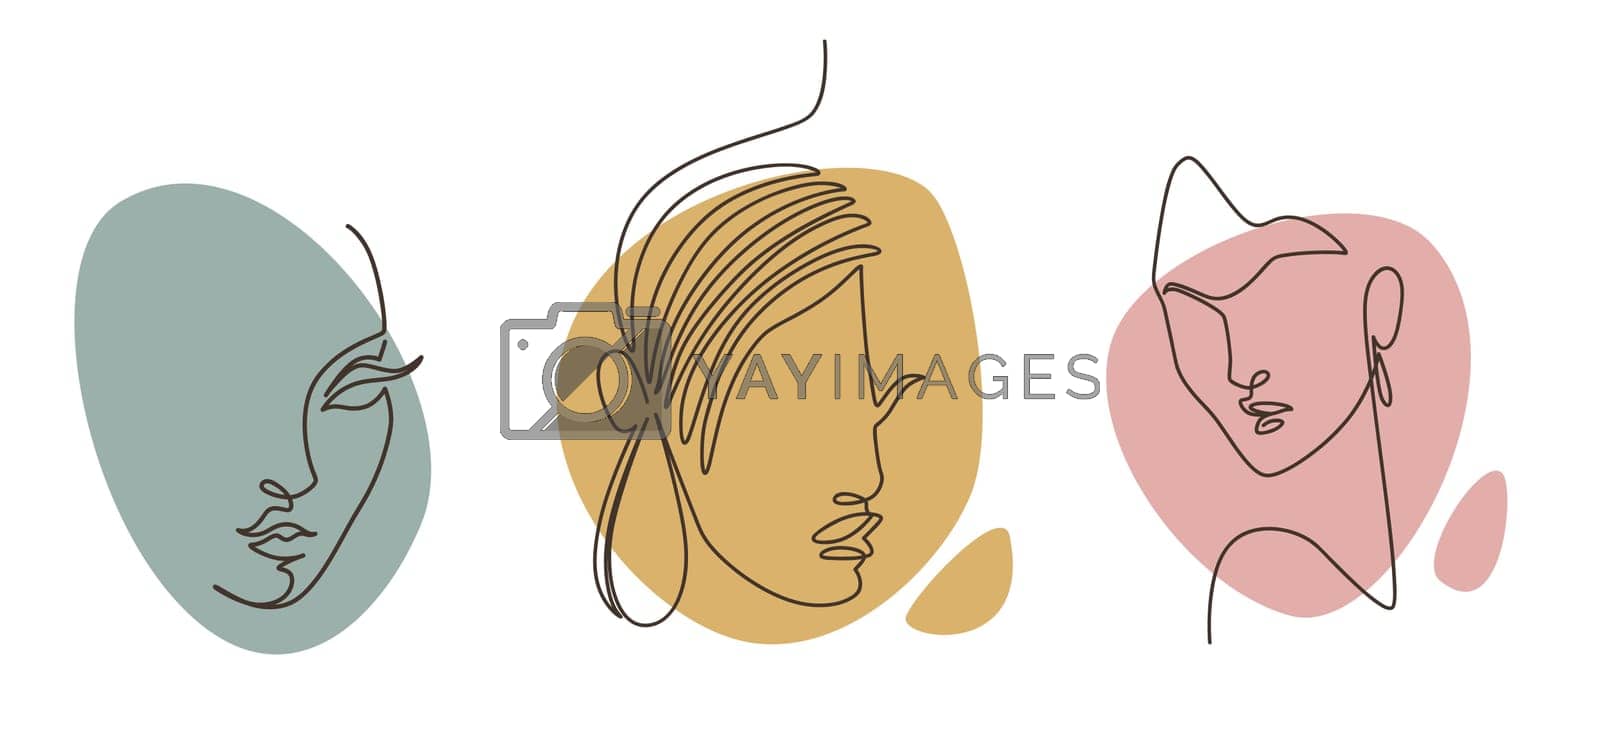 Royalty free image of Minimalist women faces, drawing and portraits by Sonulkaster